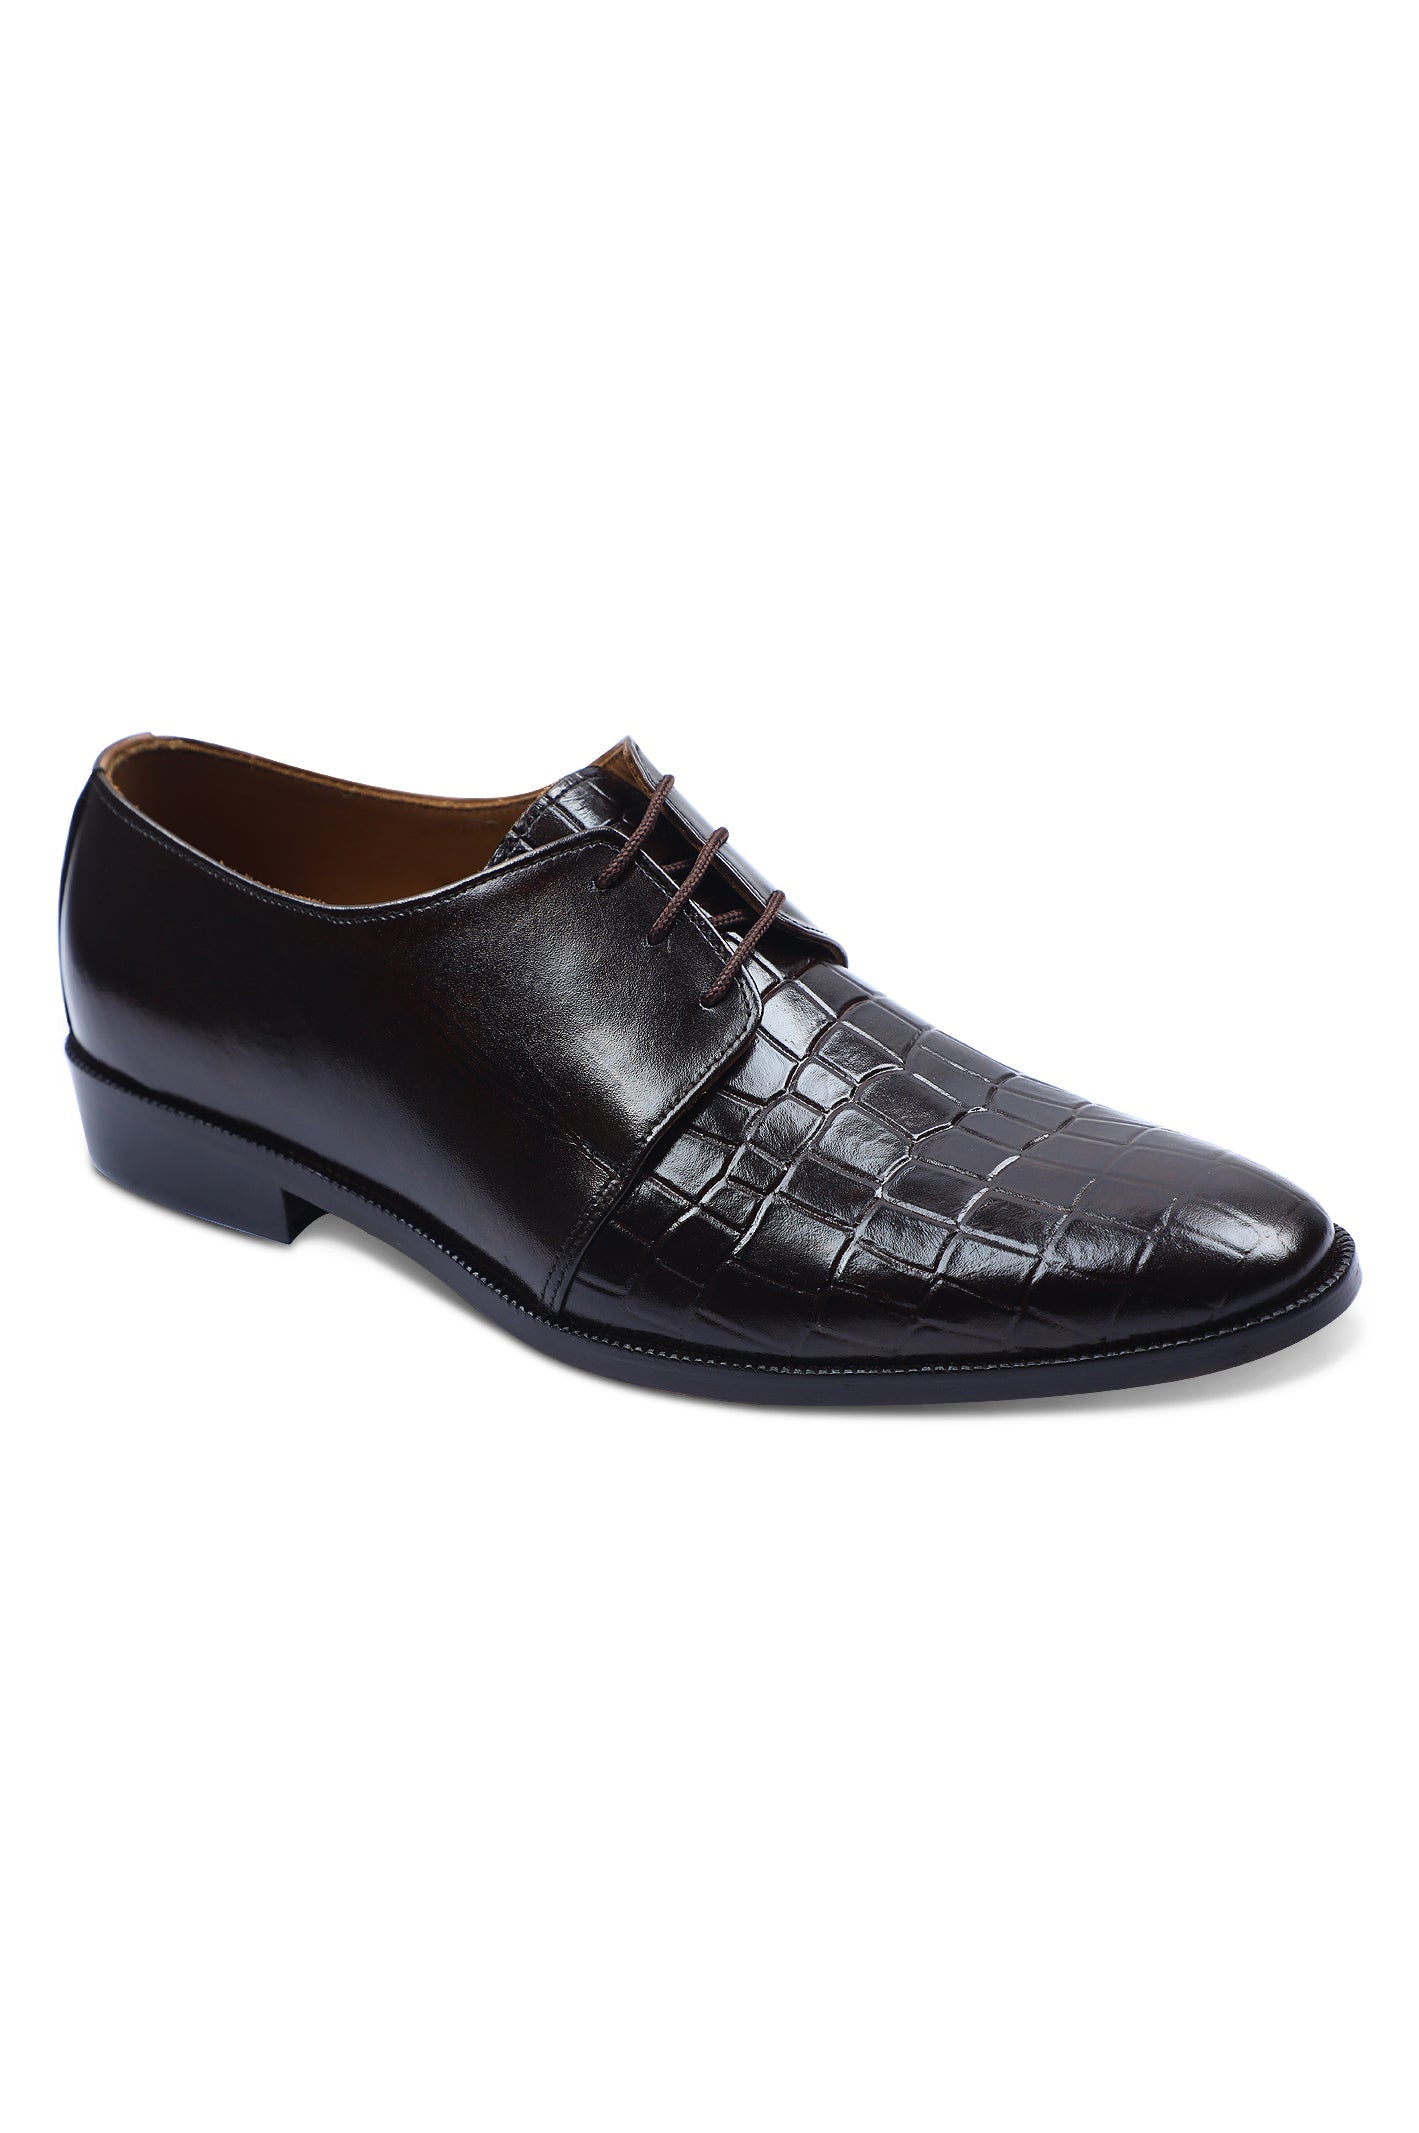 Formal Shoes For Men SKU: SMF-0234-COFFEE - Diners